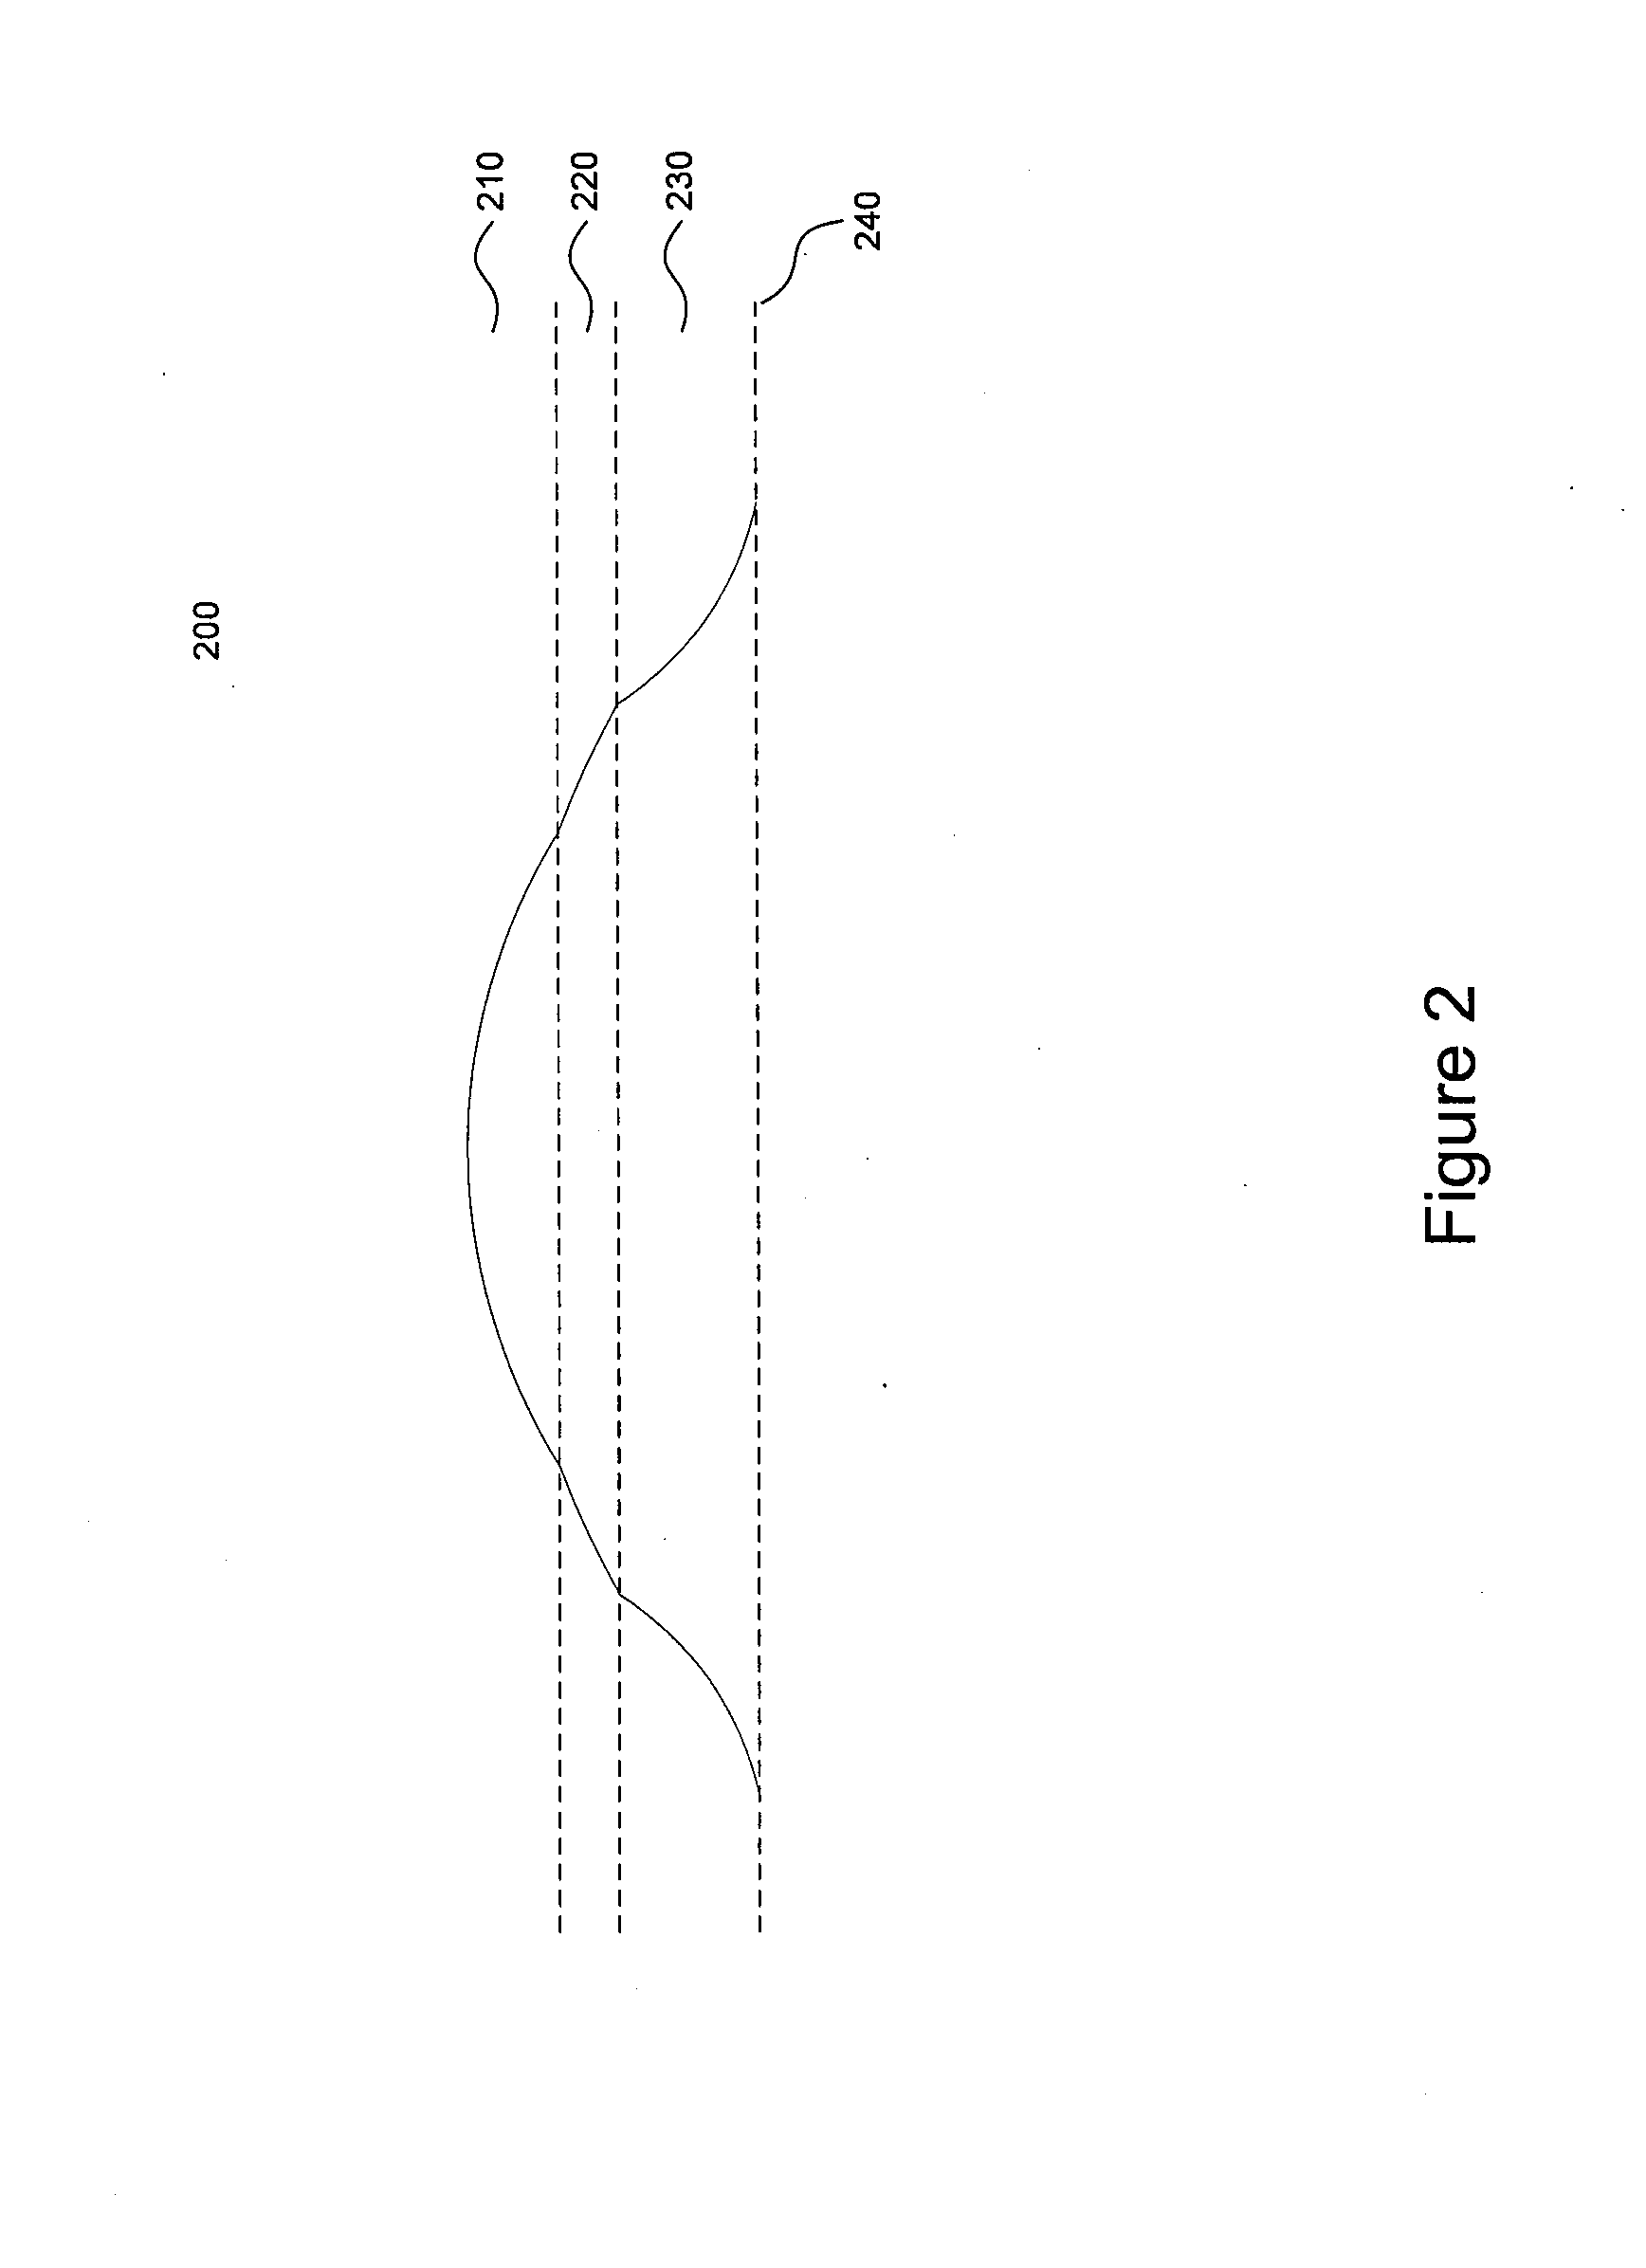 Scleral contact lens and methods for making and using the same